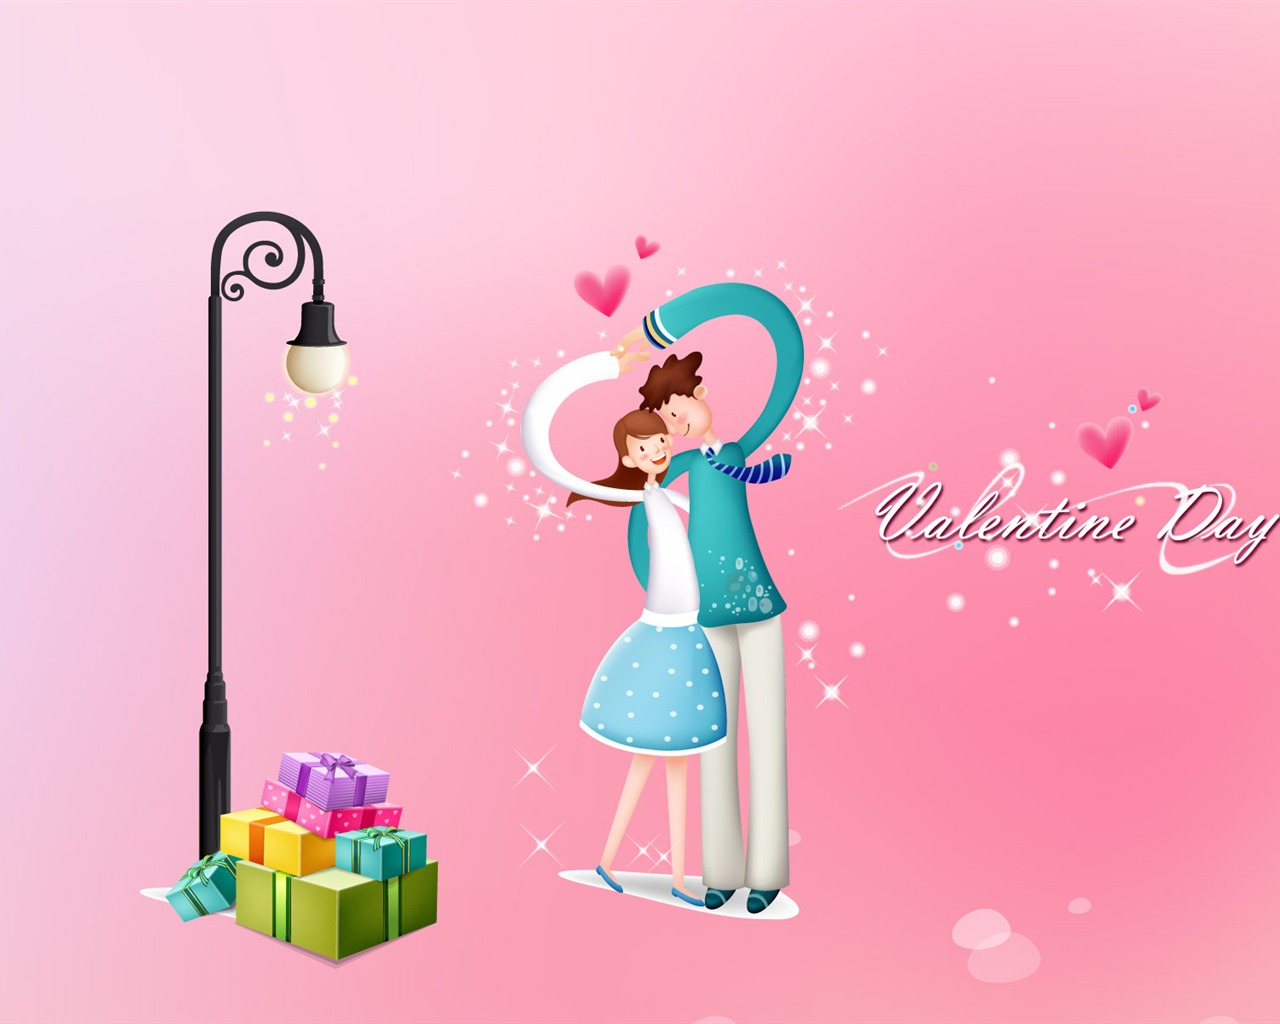 Valentine's Day Theme Wallpapers (2) #20 - 1280x1024